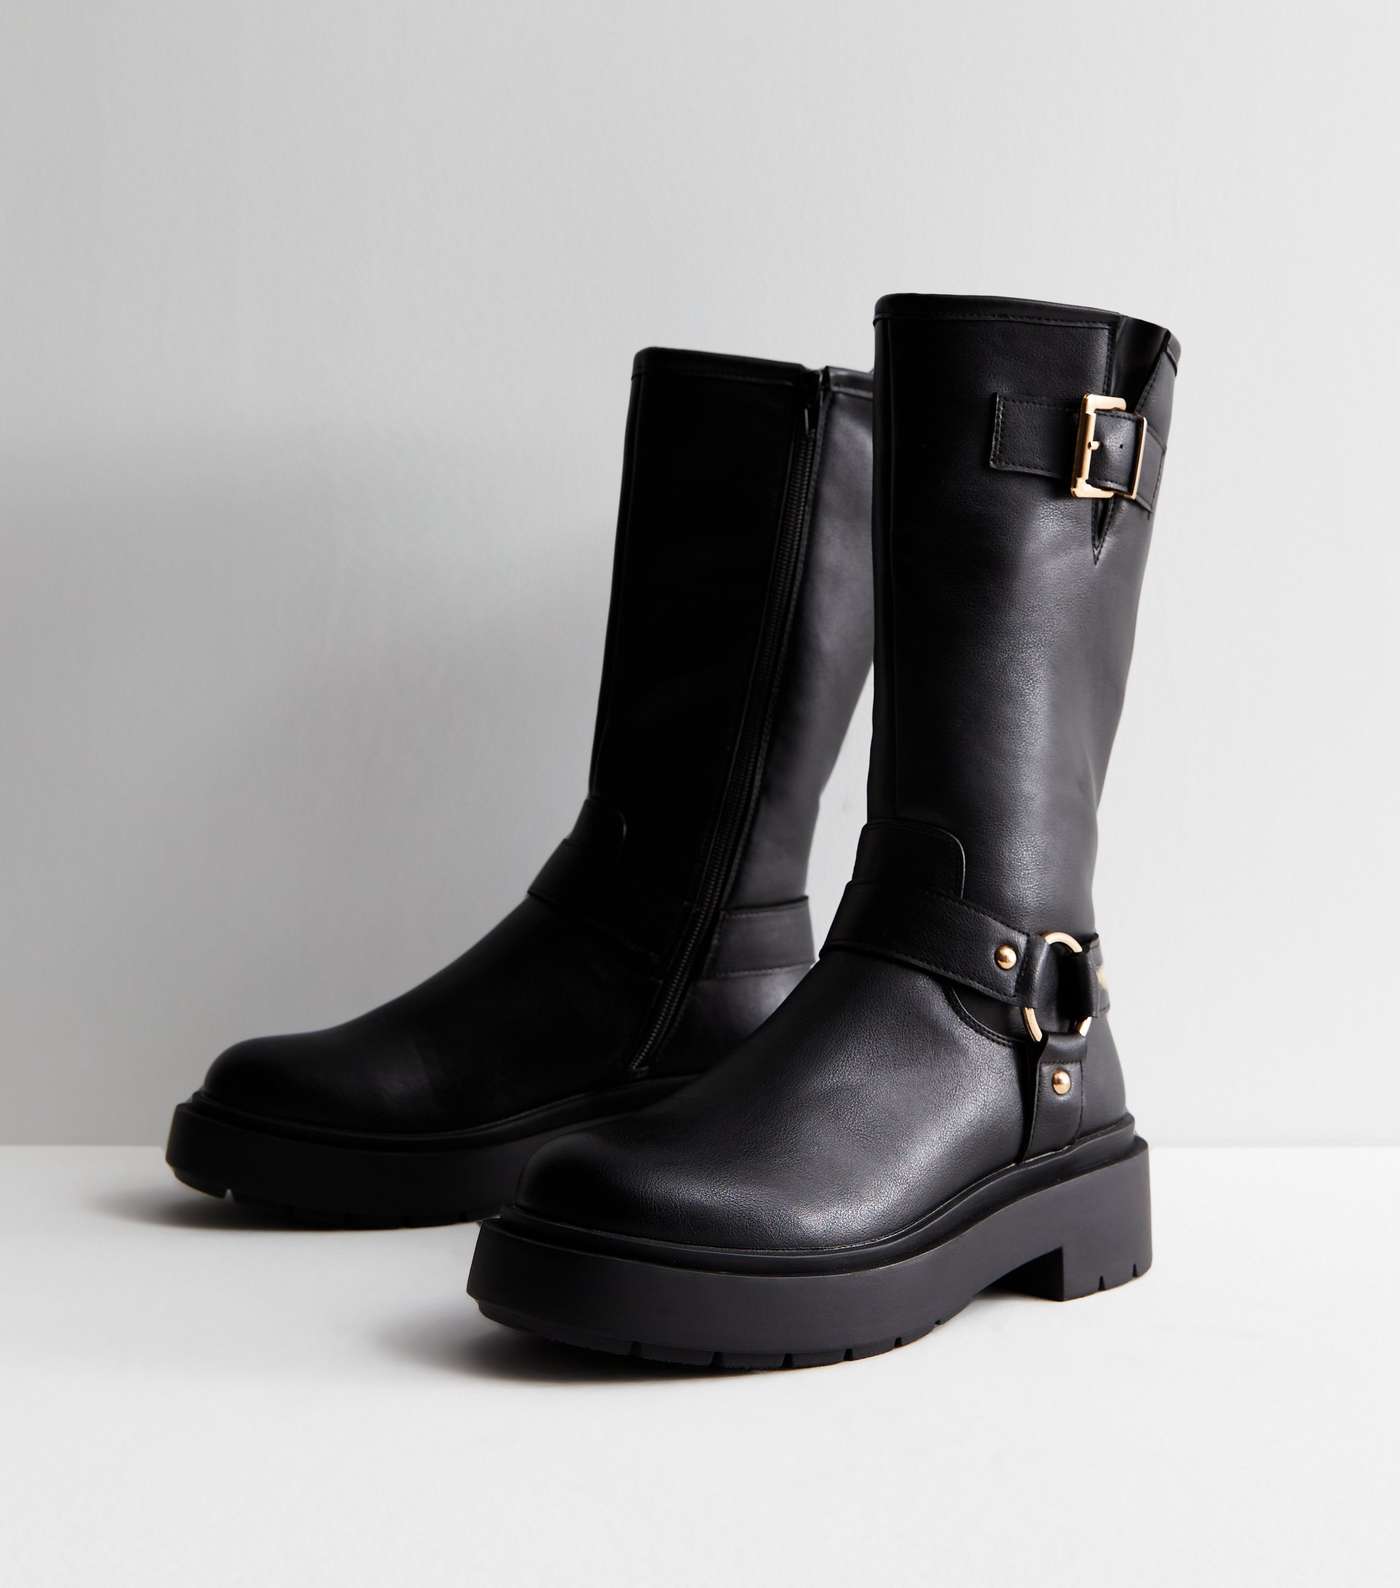 Black Leather-Look Stretch Calf Biker Boots | New Look